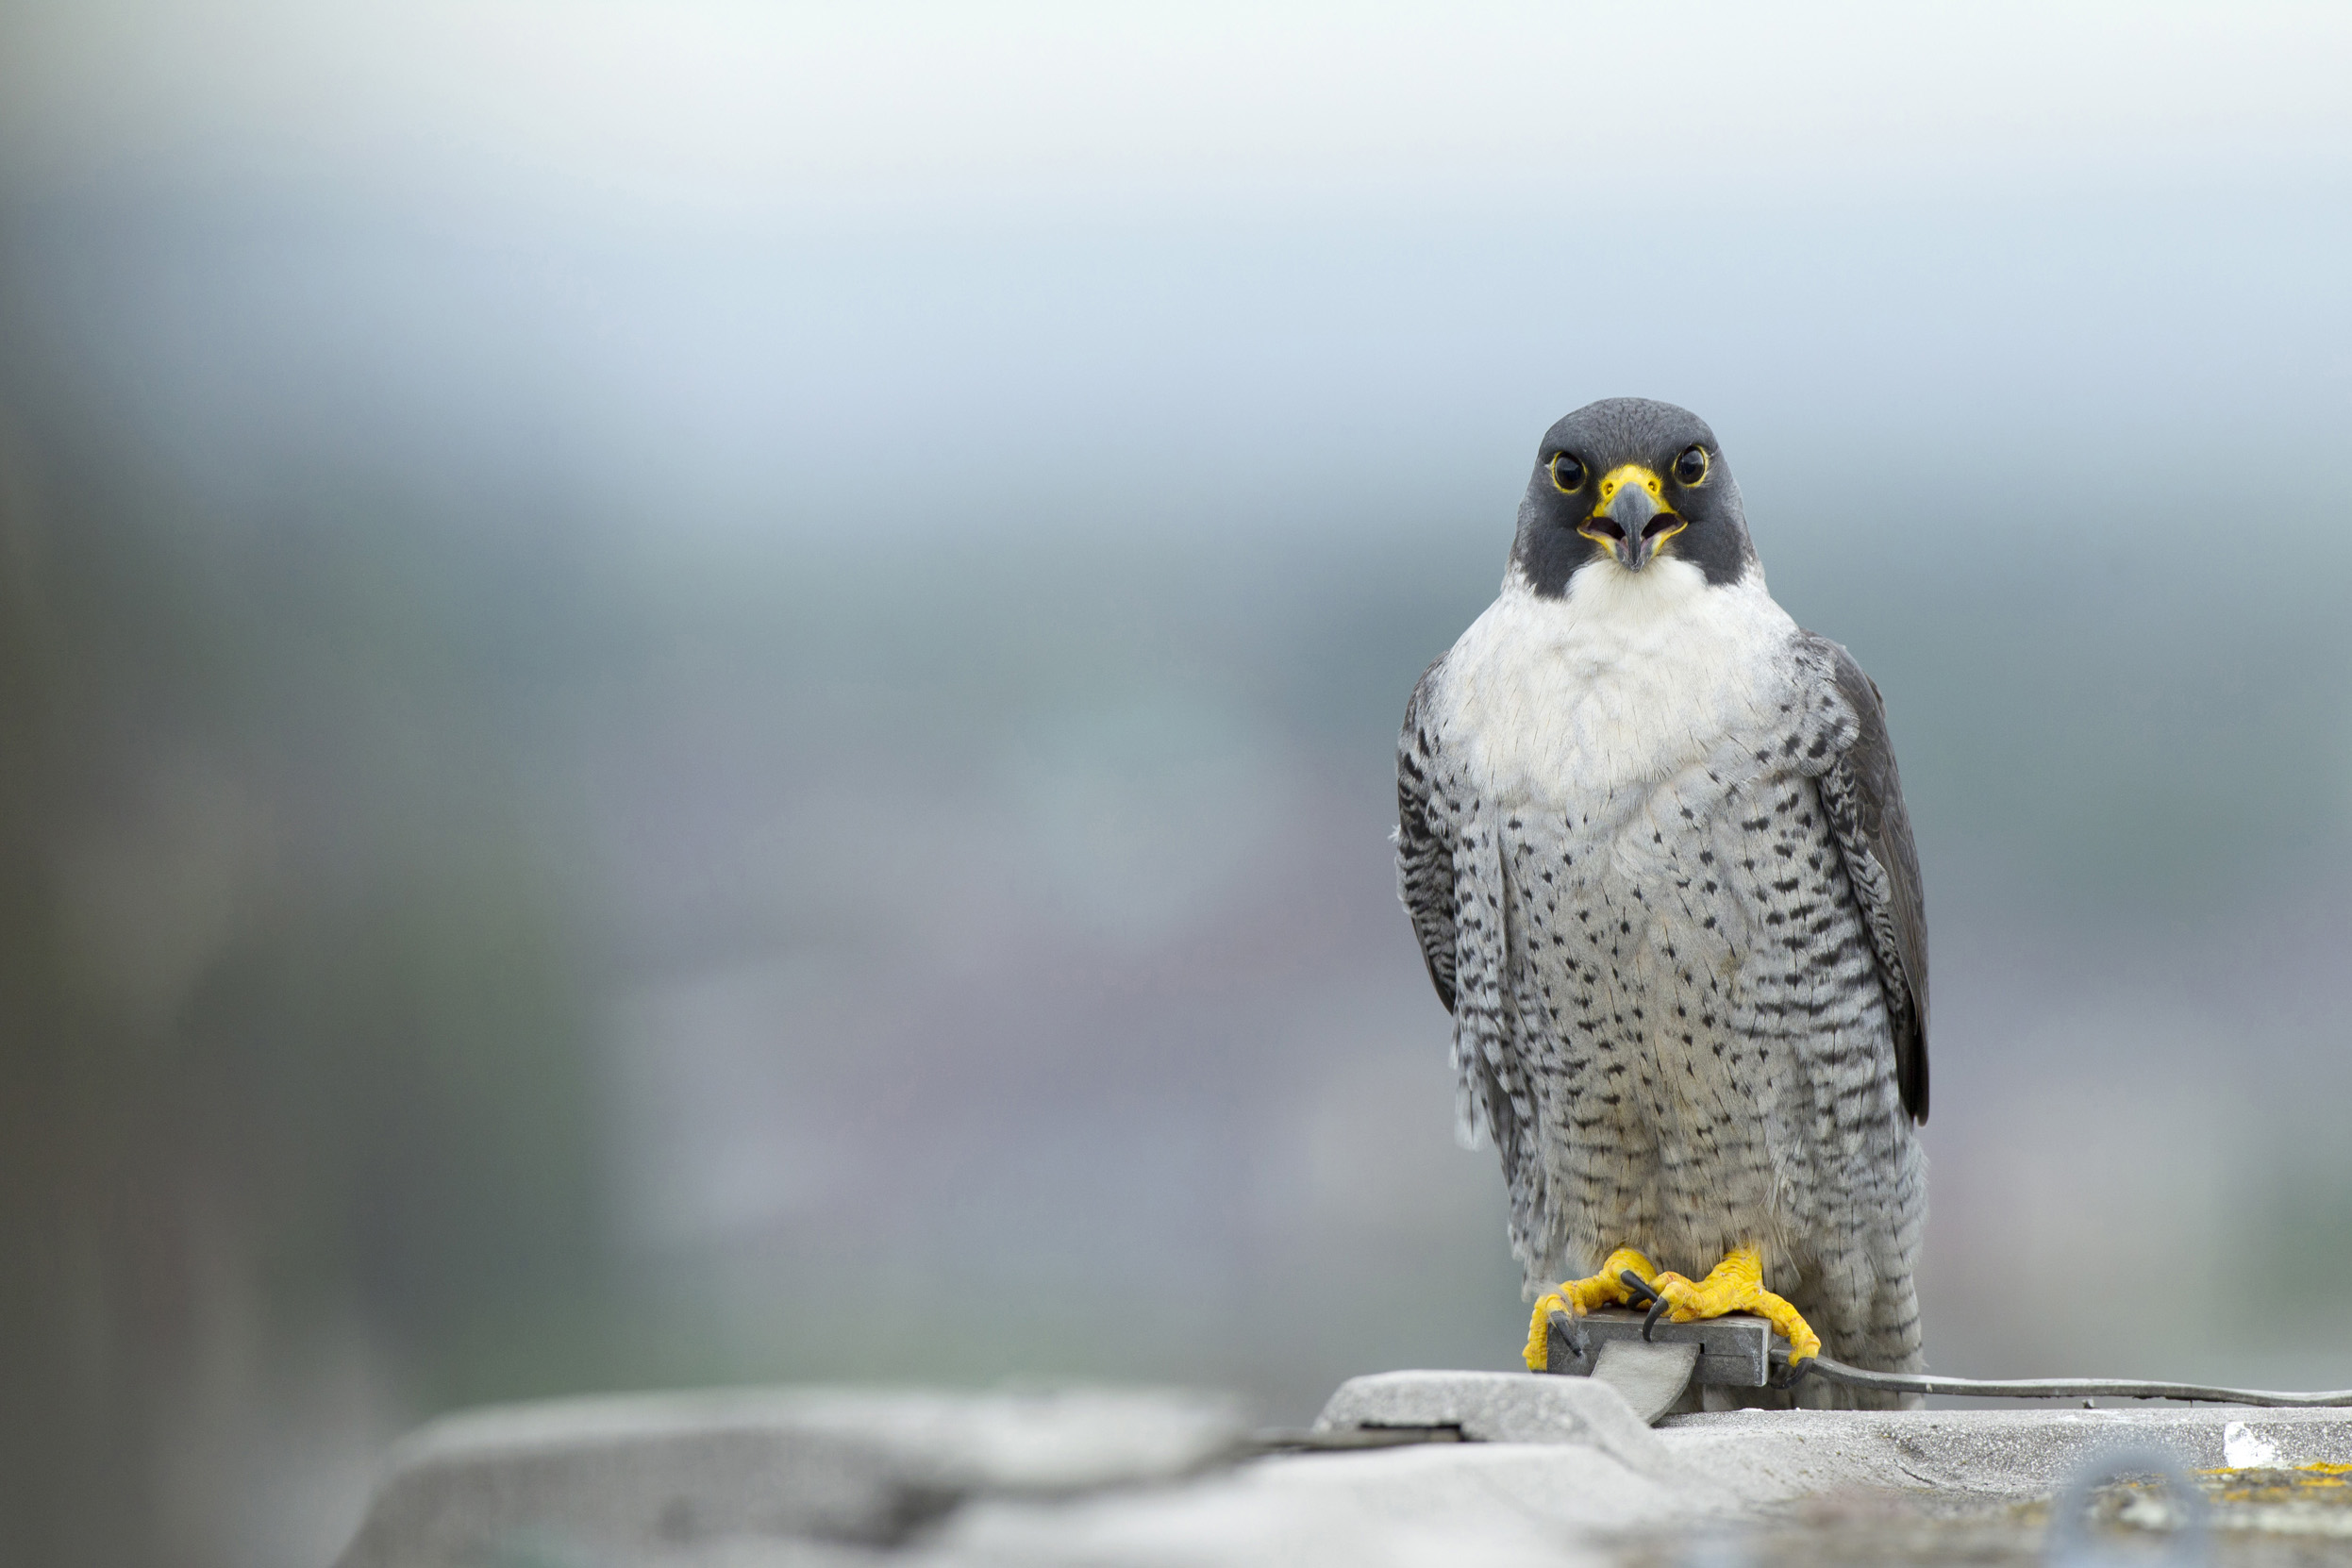 A lone Peregrine falcon perched on hotel roof.